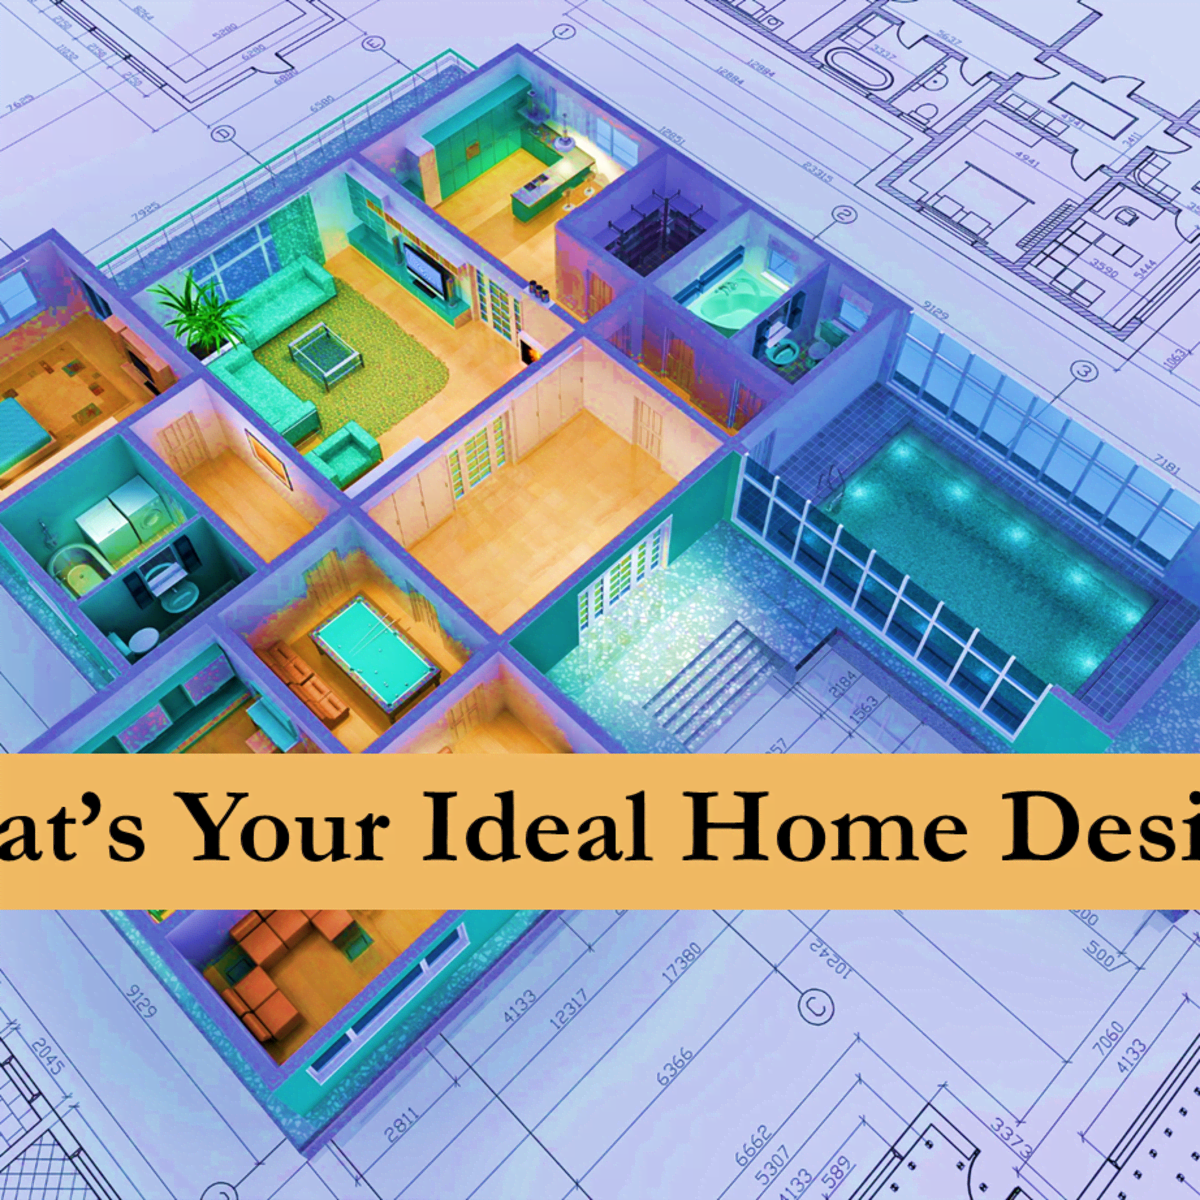 Your I-Deal Home